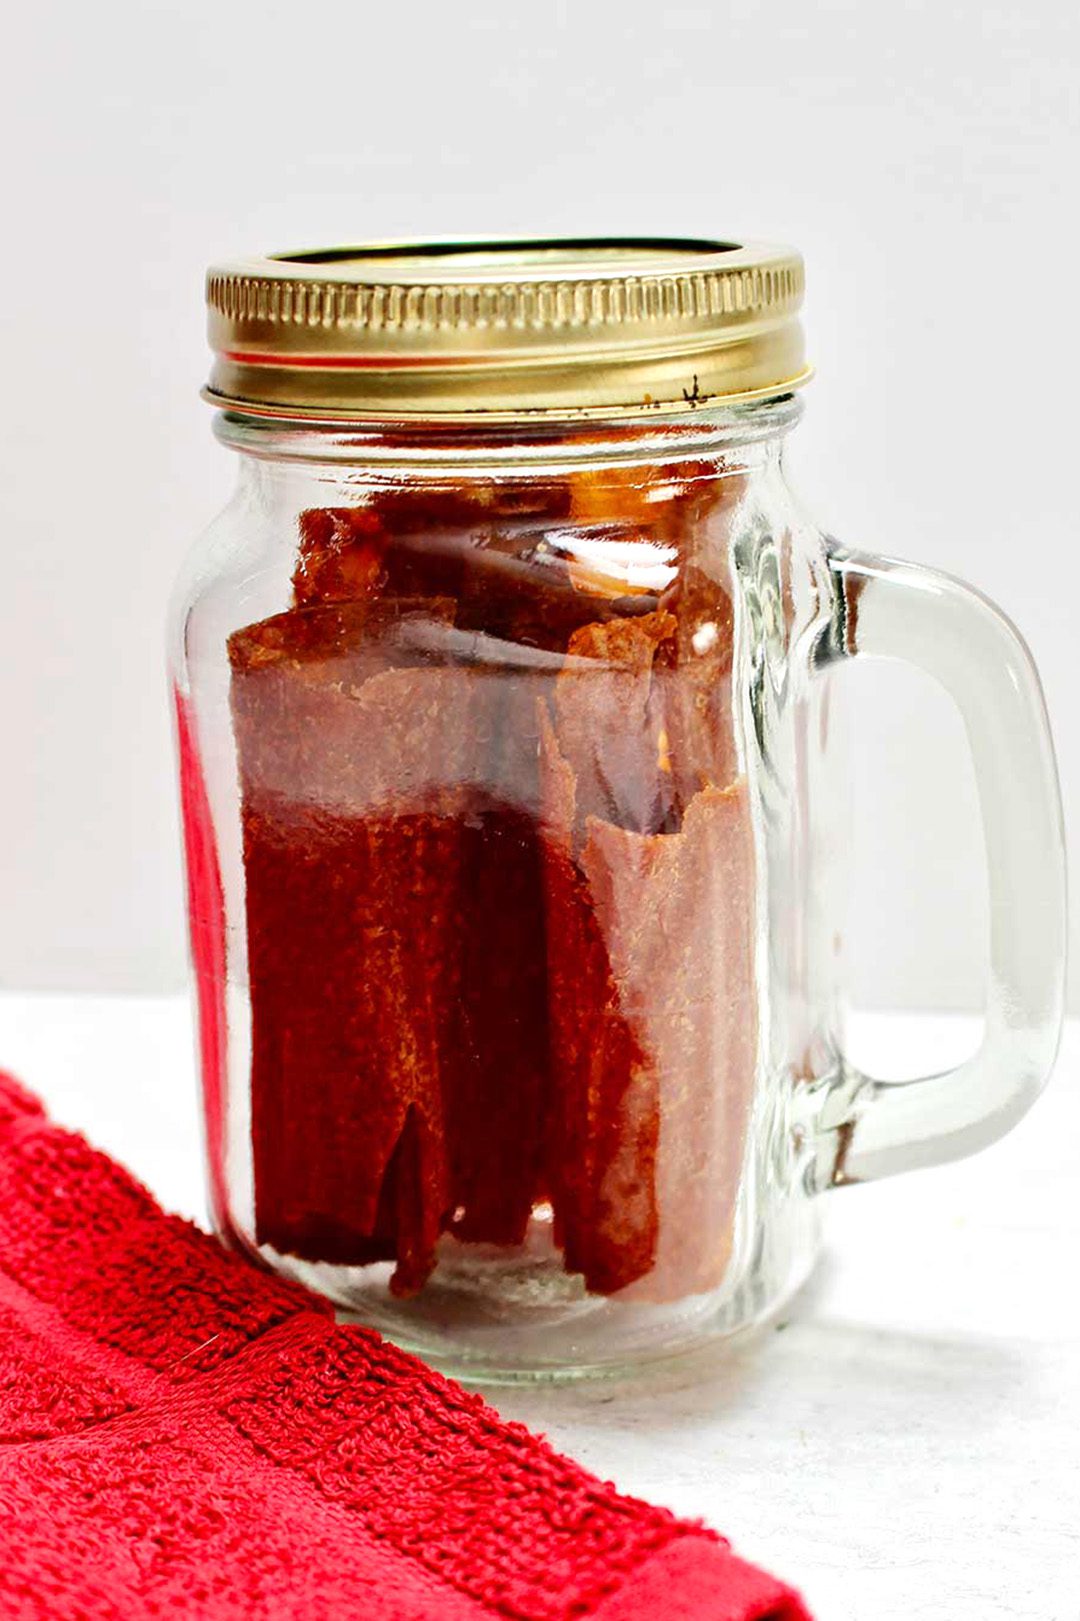 Mason jar of finished fruit leathers with red dish towel resting on white counter top.